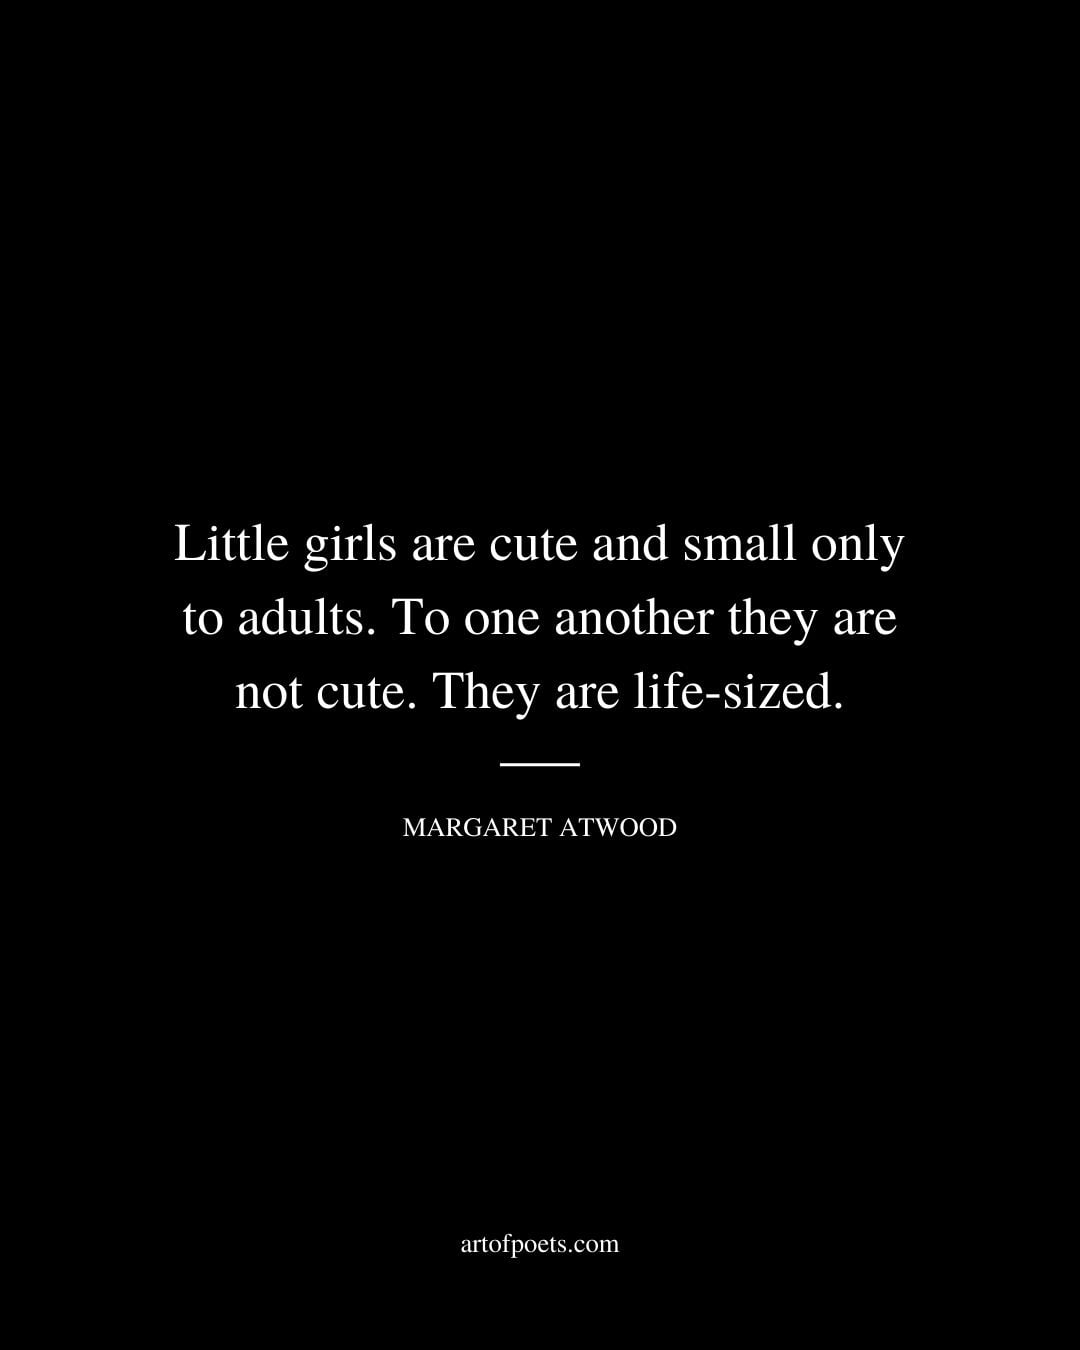 Little girls are cute and small only to adults. To one another they are not cute. They are life sized 1